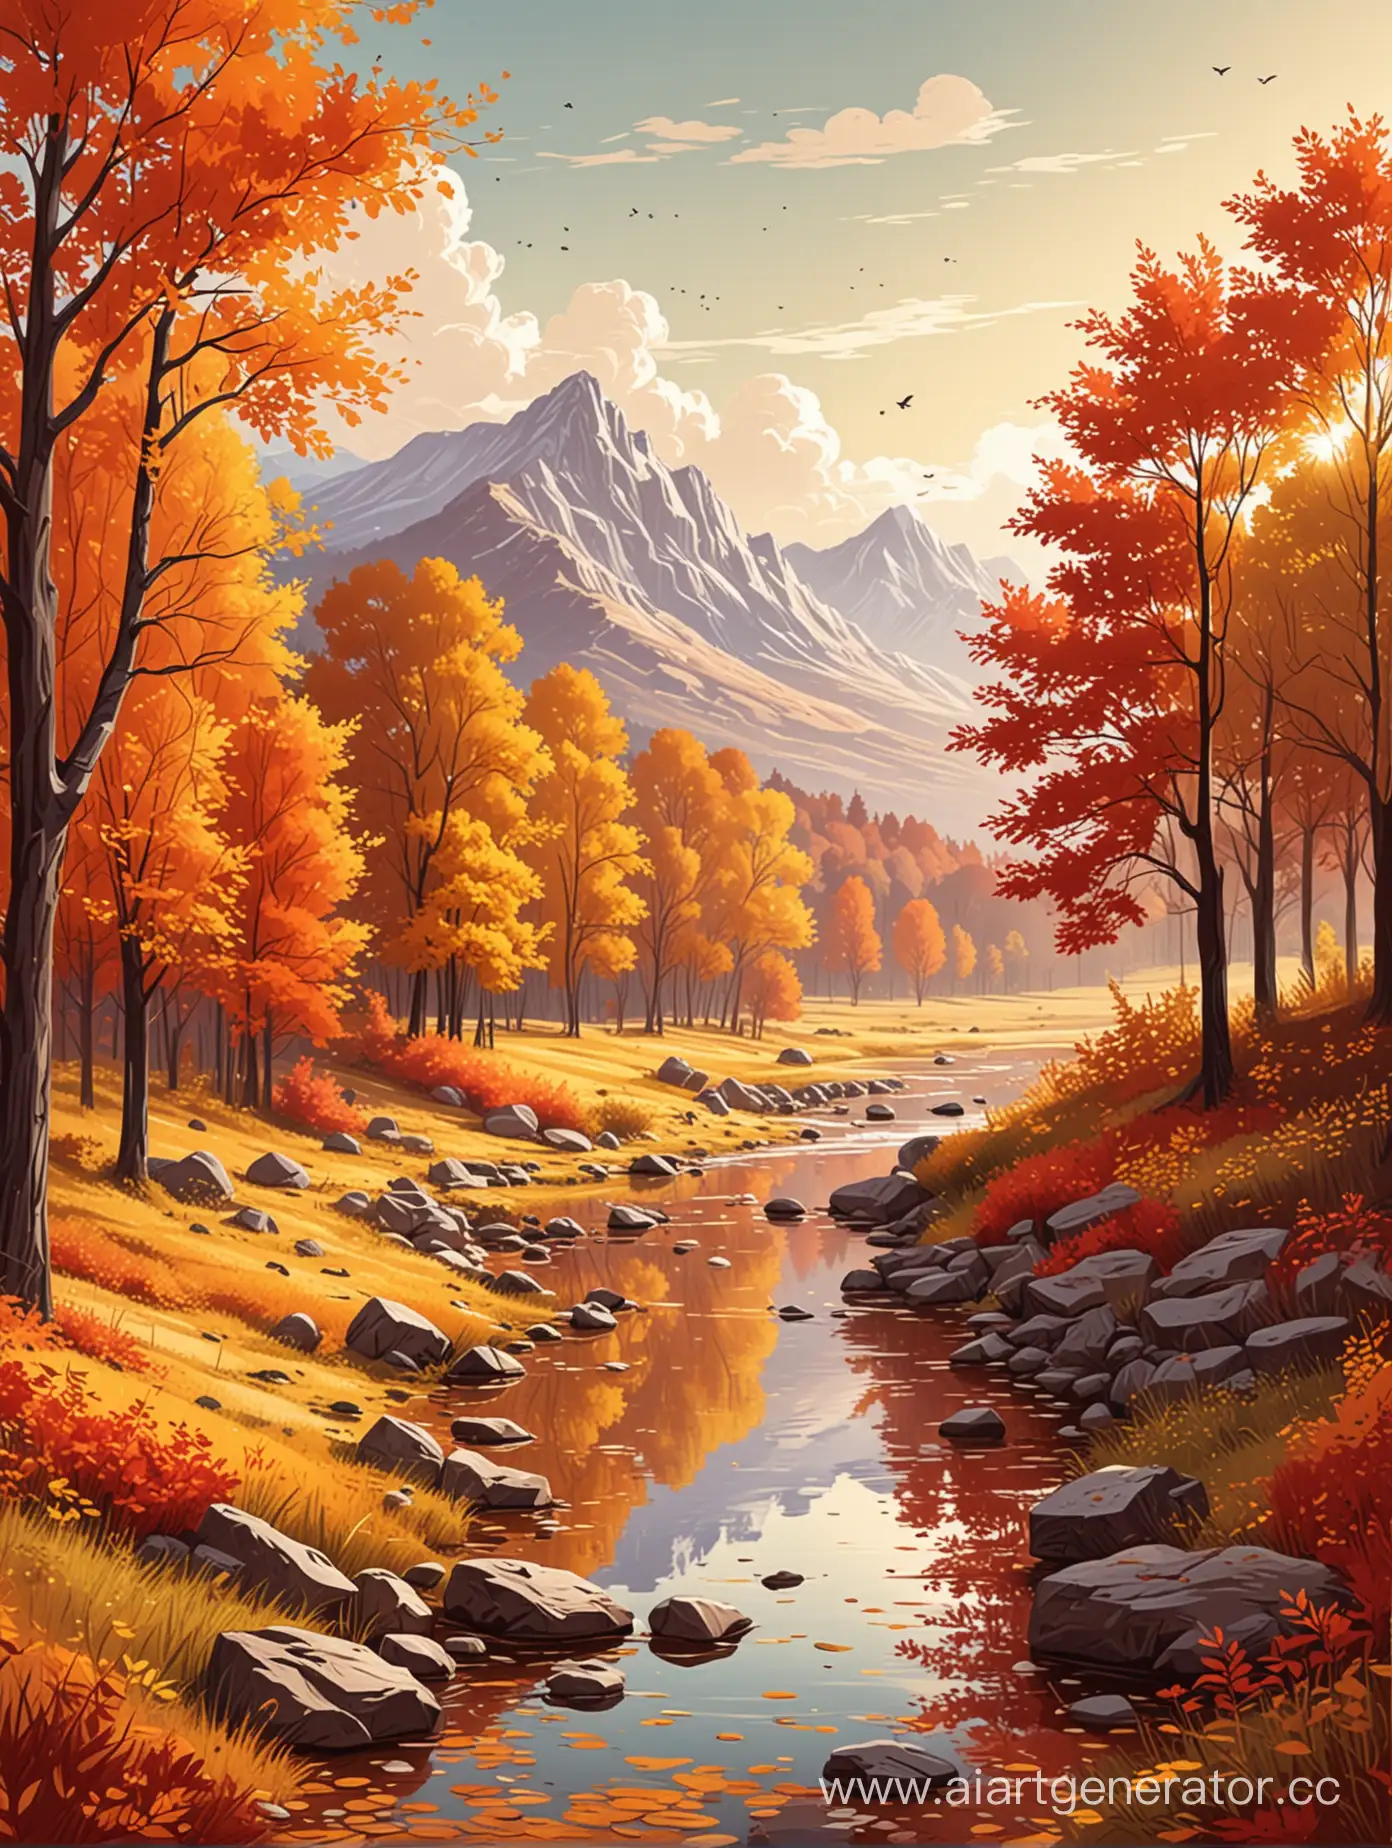 Vibrant-Autumn-Landscape-Illustration-Colorful-Trees-and-Falling-Leaves